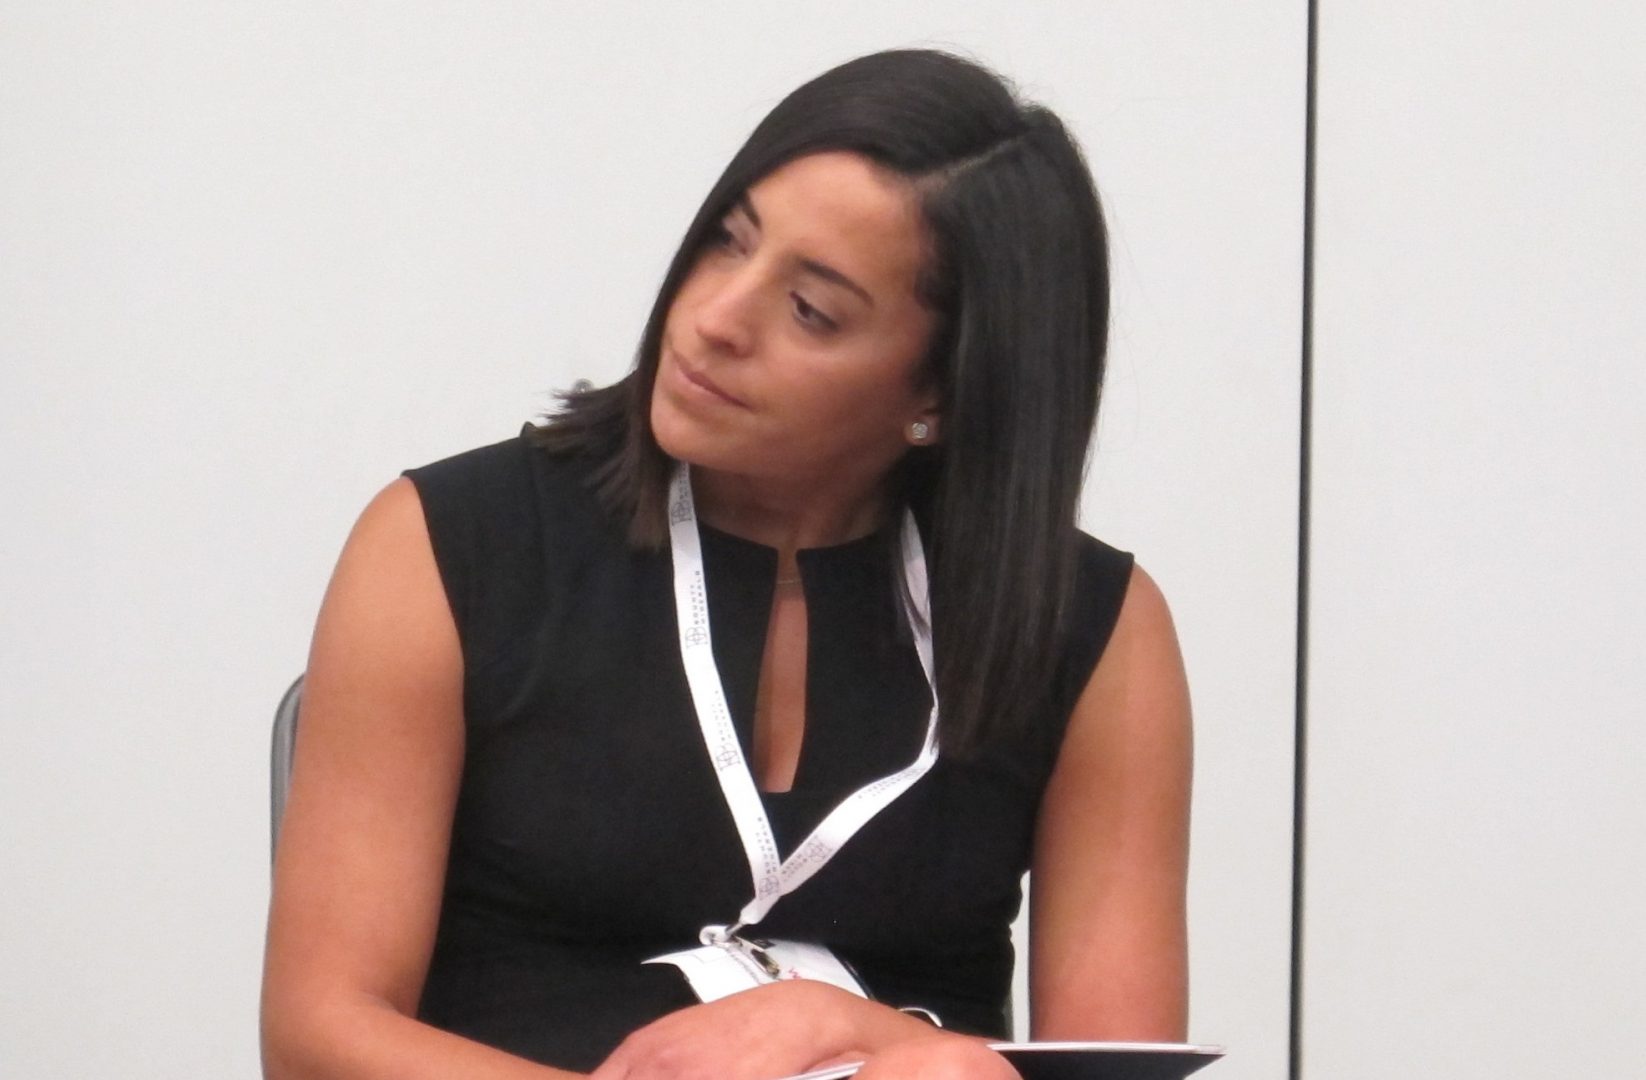 FILE PHOTO: Gov. Tom Wolf aide, Yesenia Bane, speaking on a panel discussion at the Marcellus Shale Coalition's annual conference in Pittsburgh in September 2016.